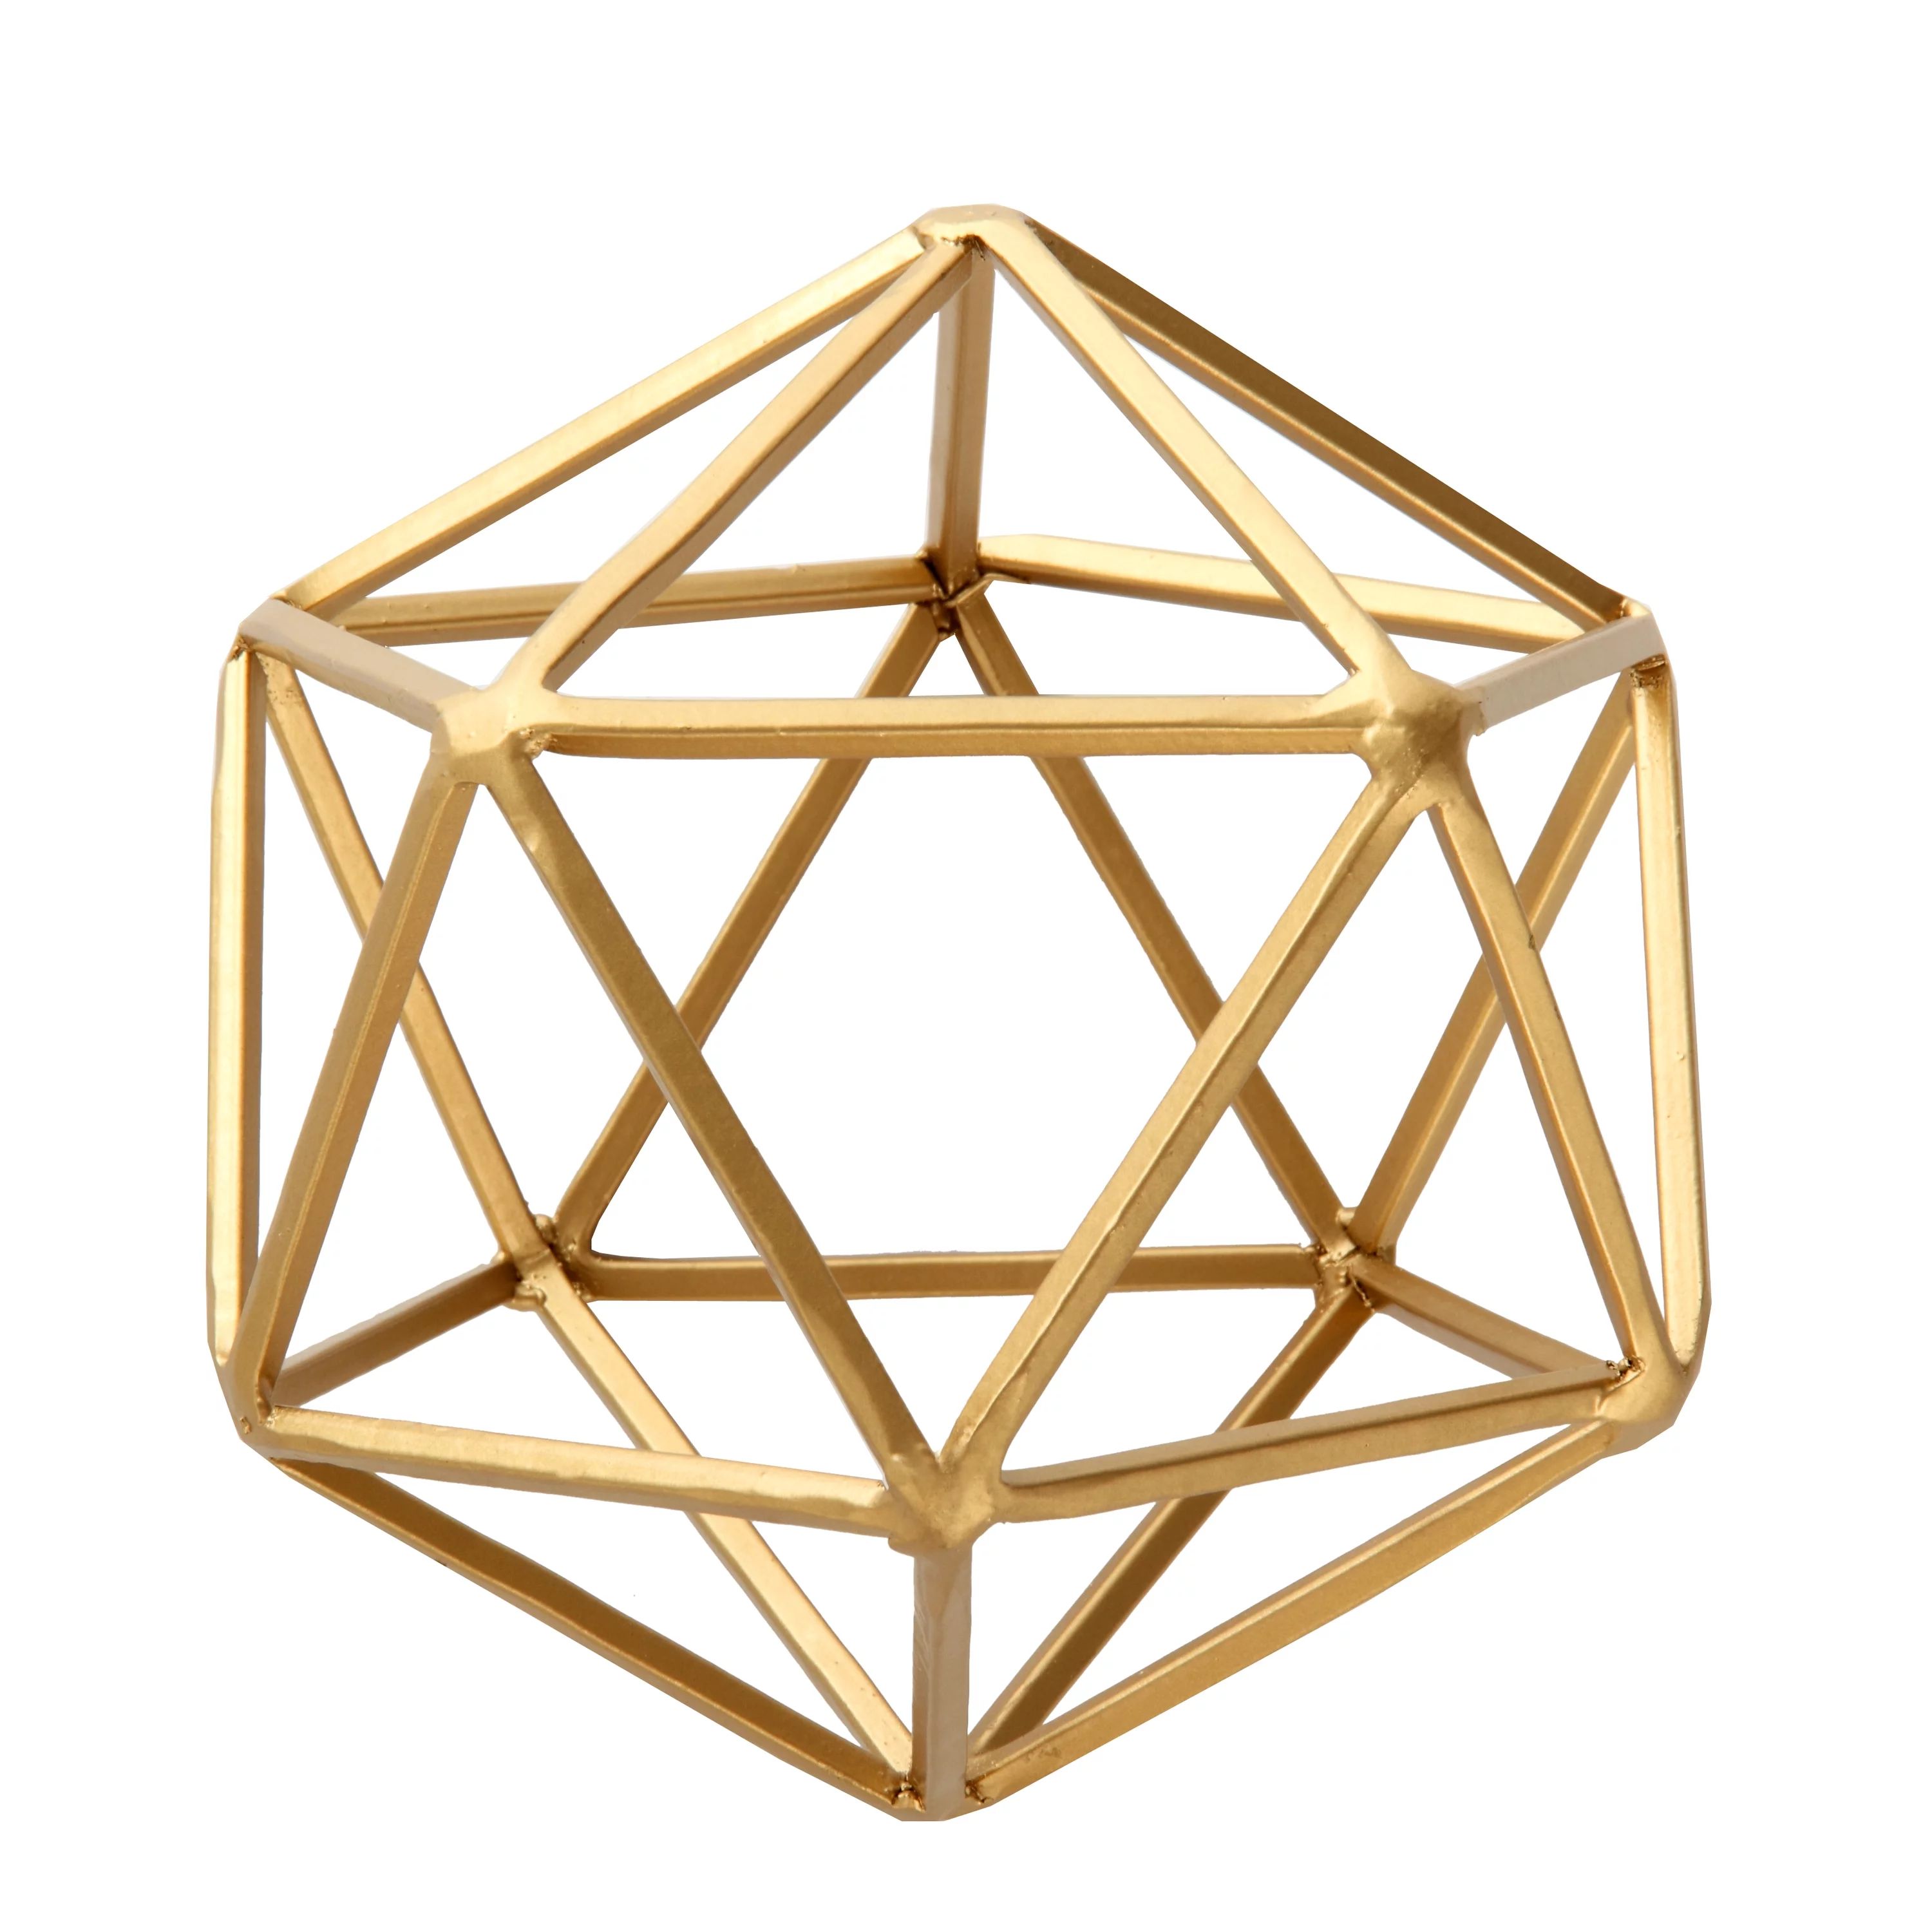 The Better Homes and Gardens Gold Geometric Tabletop Sculpture | Walmart (US)